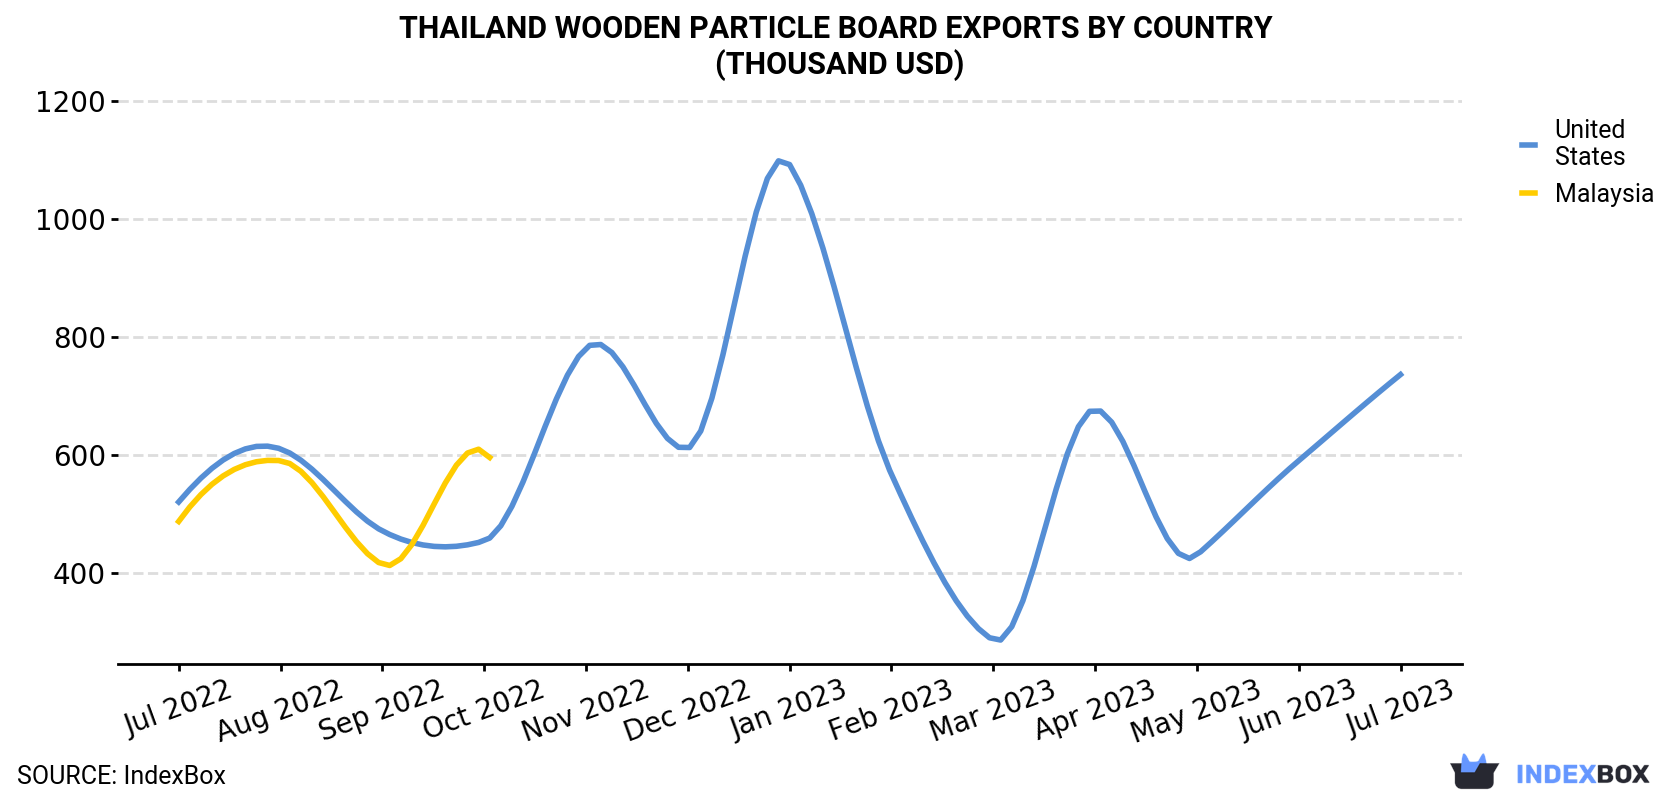 Thailand Wooden Particle Board Exports By Country (Thousand USD)